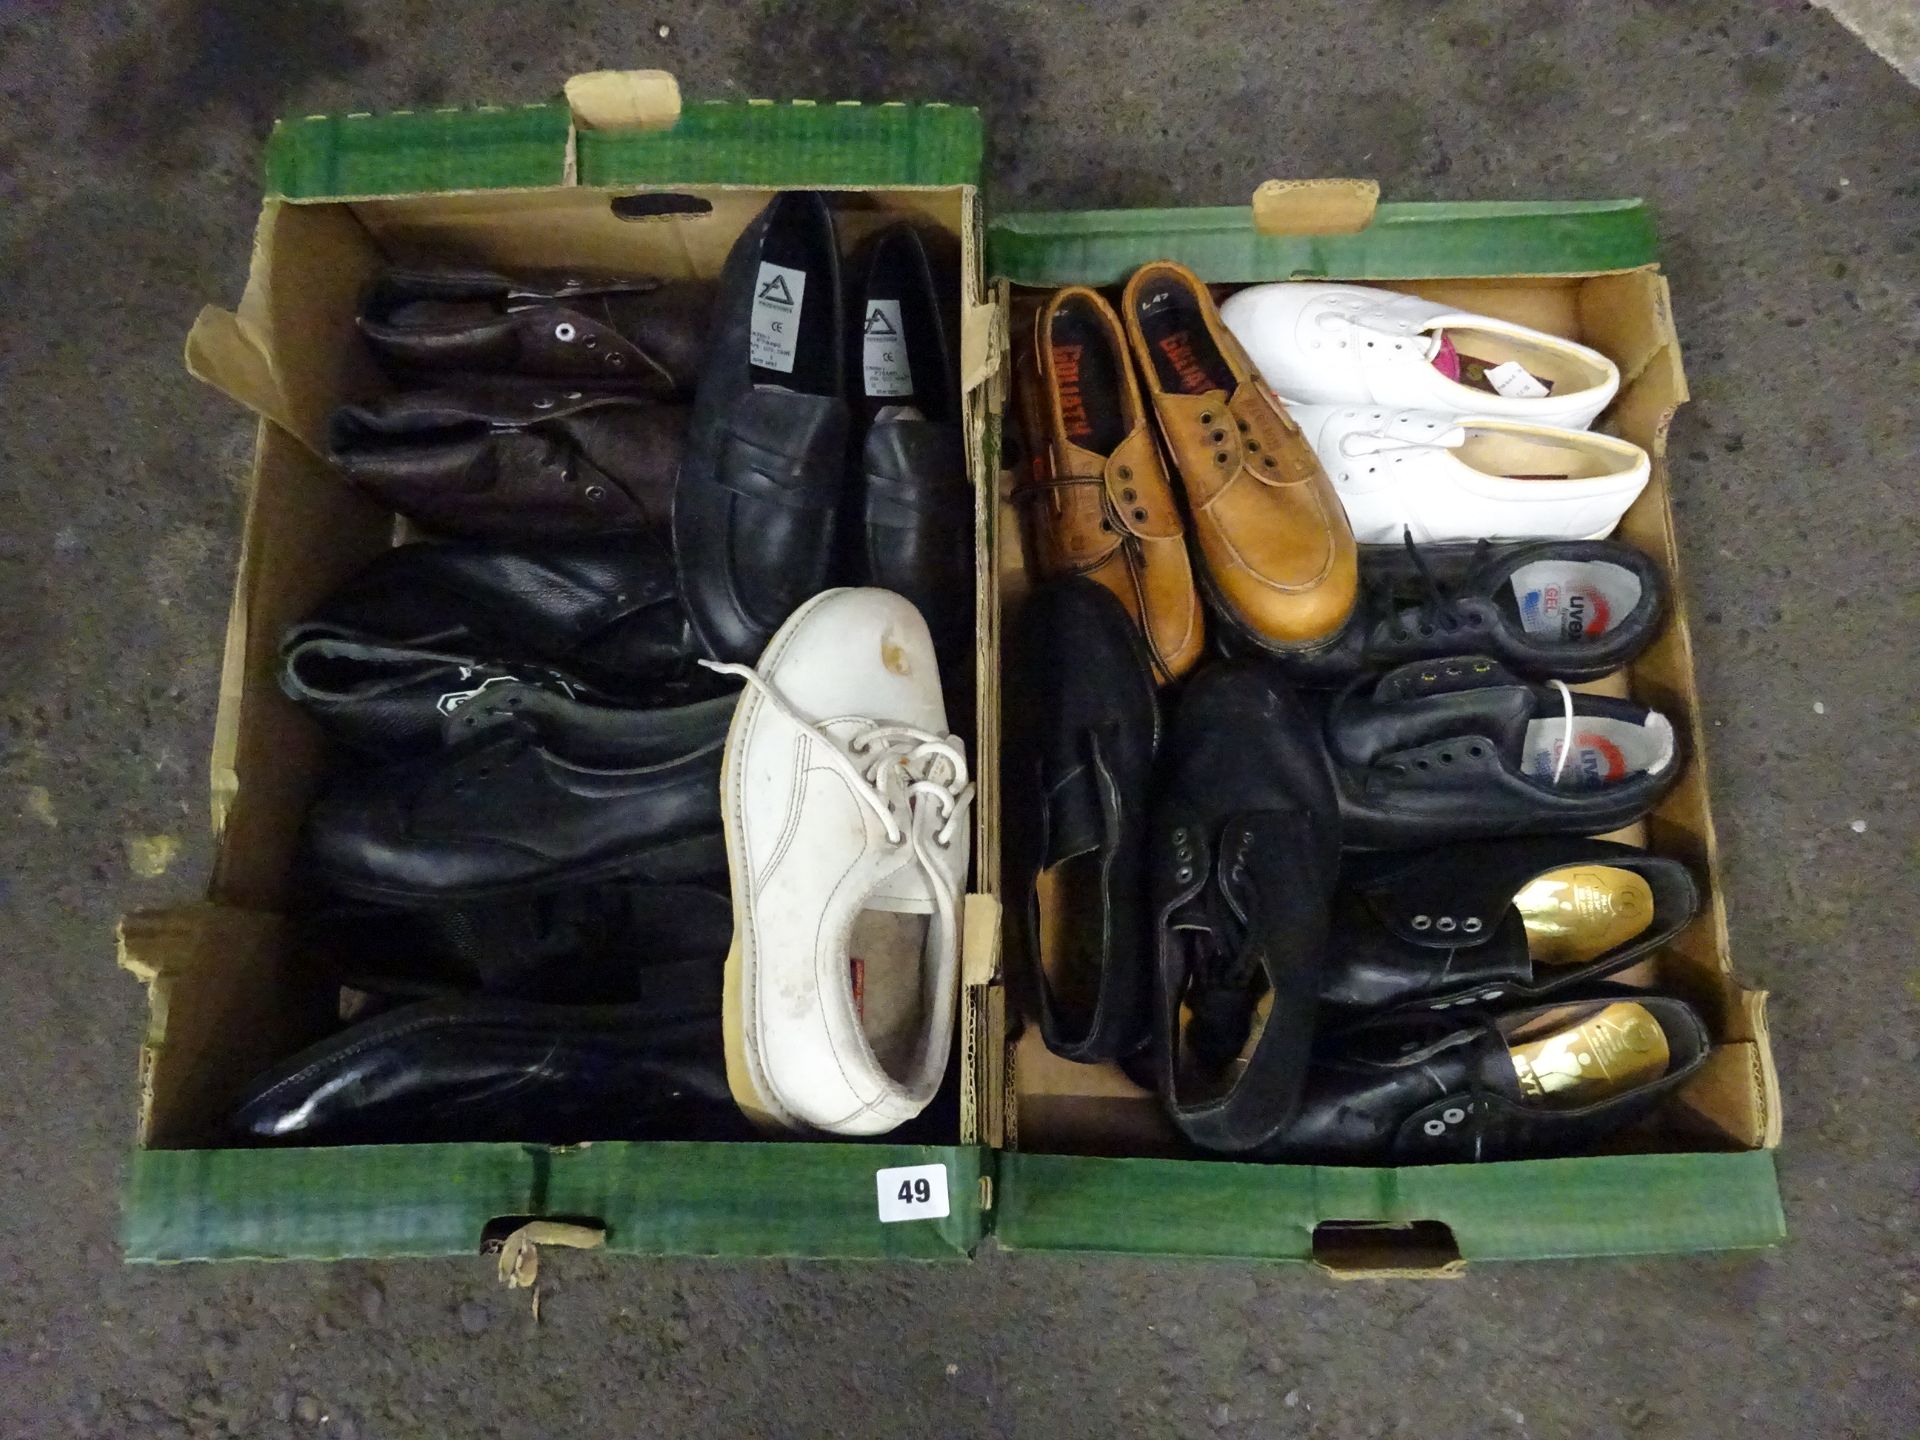 X2 BOXES OF WORKSHOES & WORK BOOTS (VARIETY OF DESIGNS & SIZES)